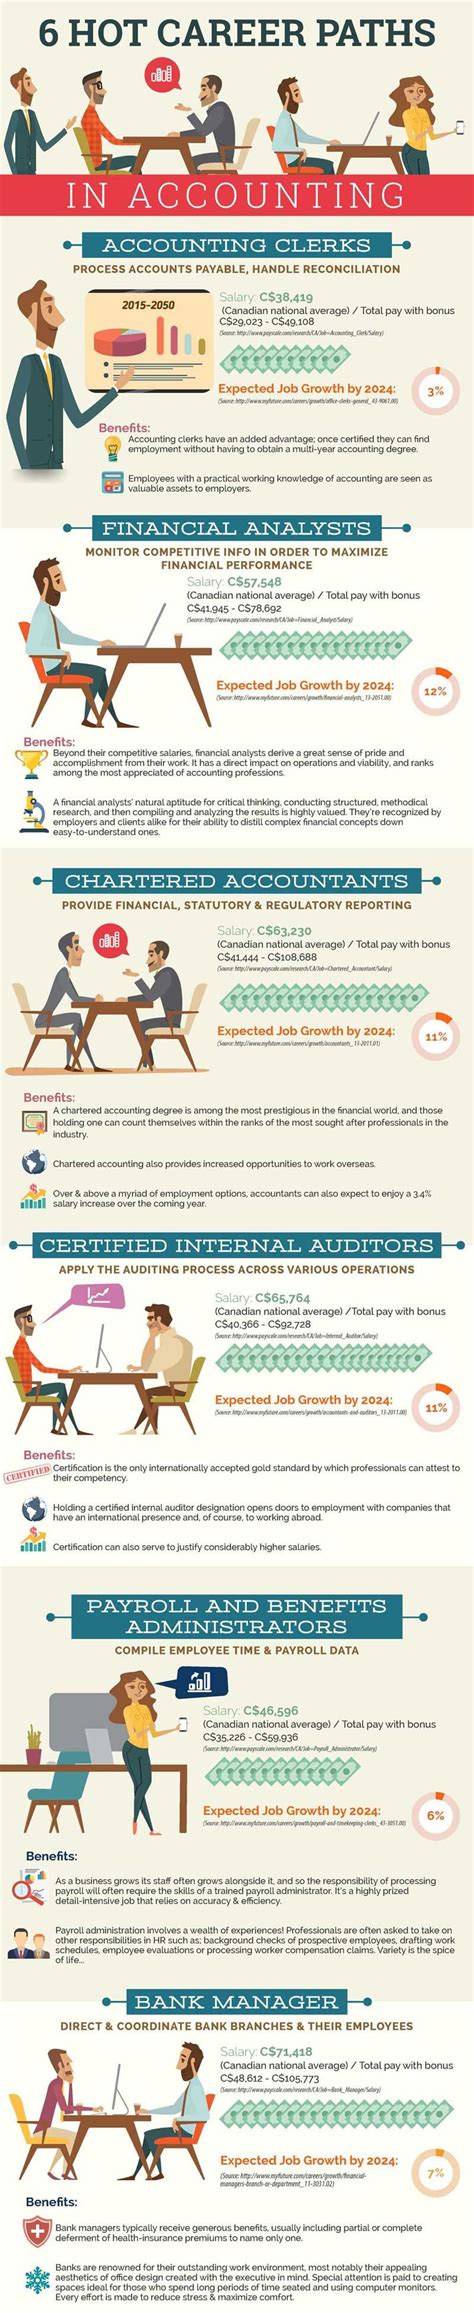 6 Hot Career Paths In Accounting Infographic The Accounting Path